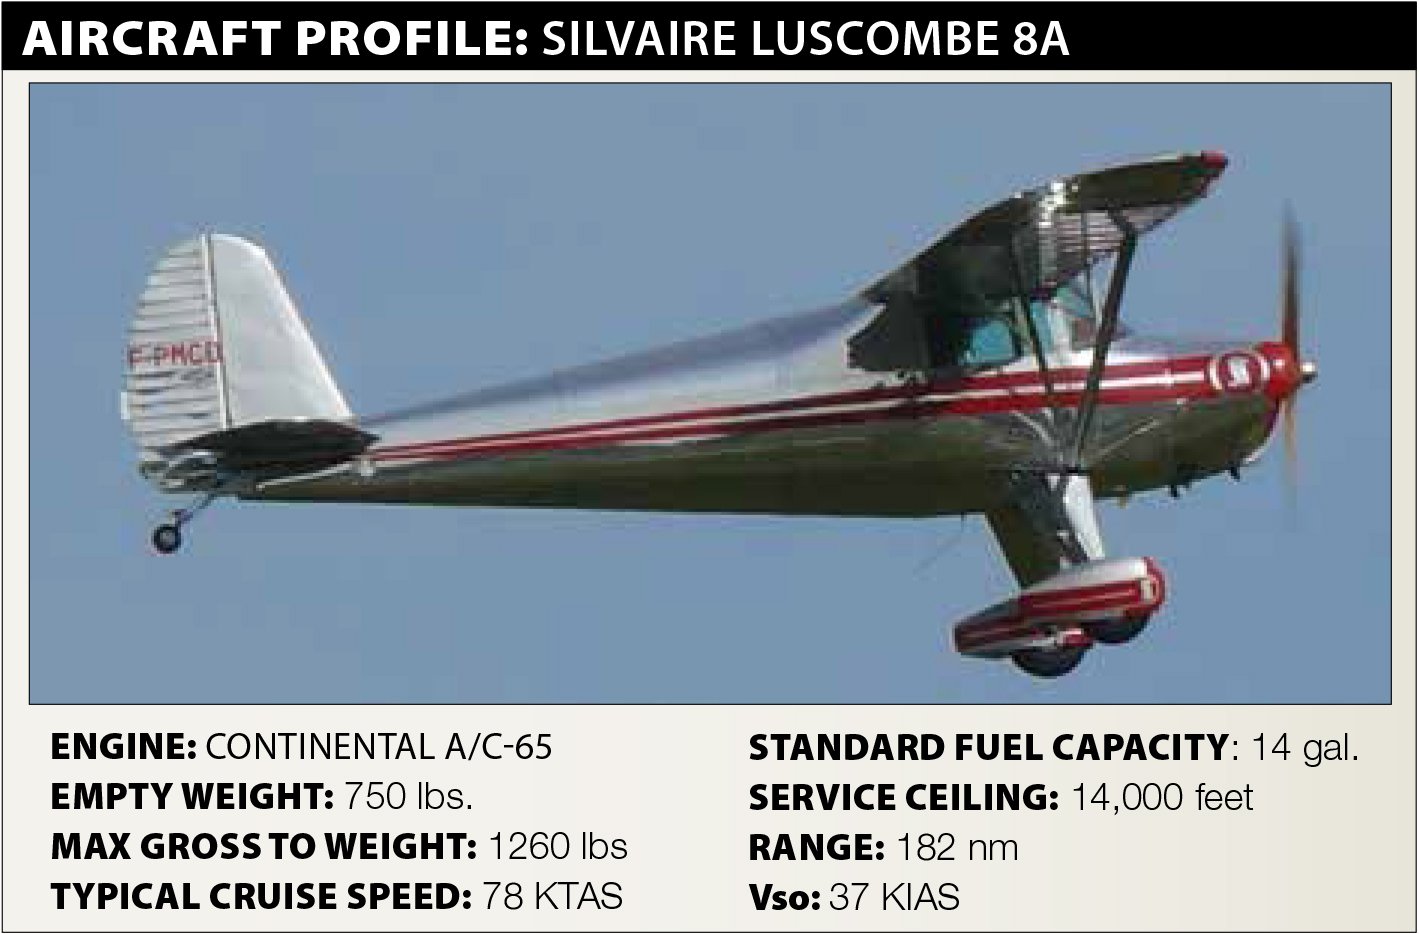 Silvaire Luscombe 8A